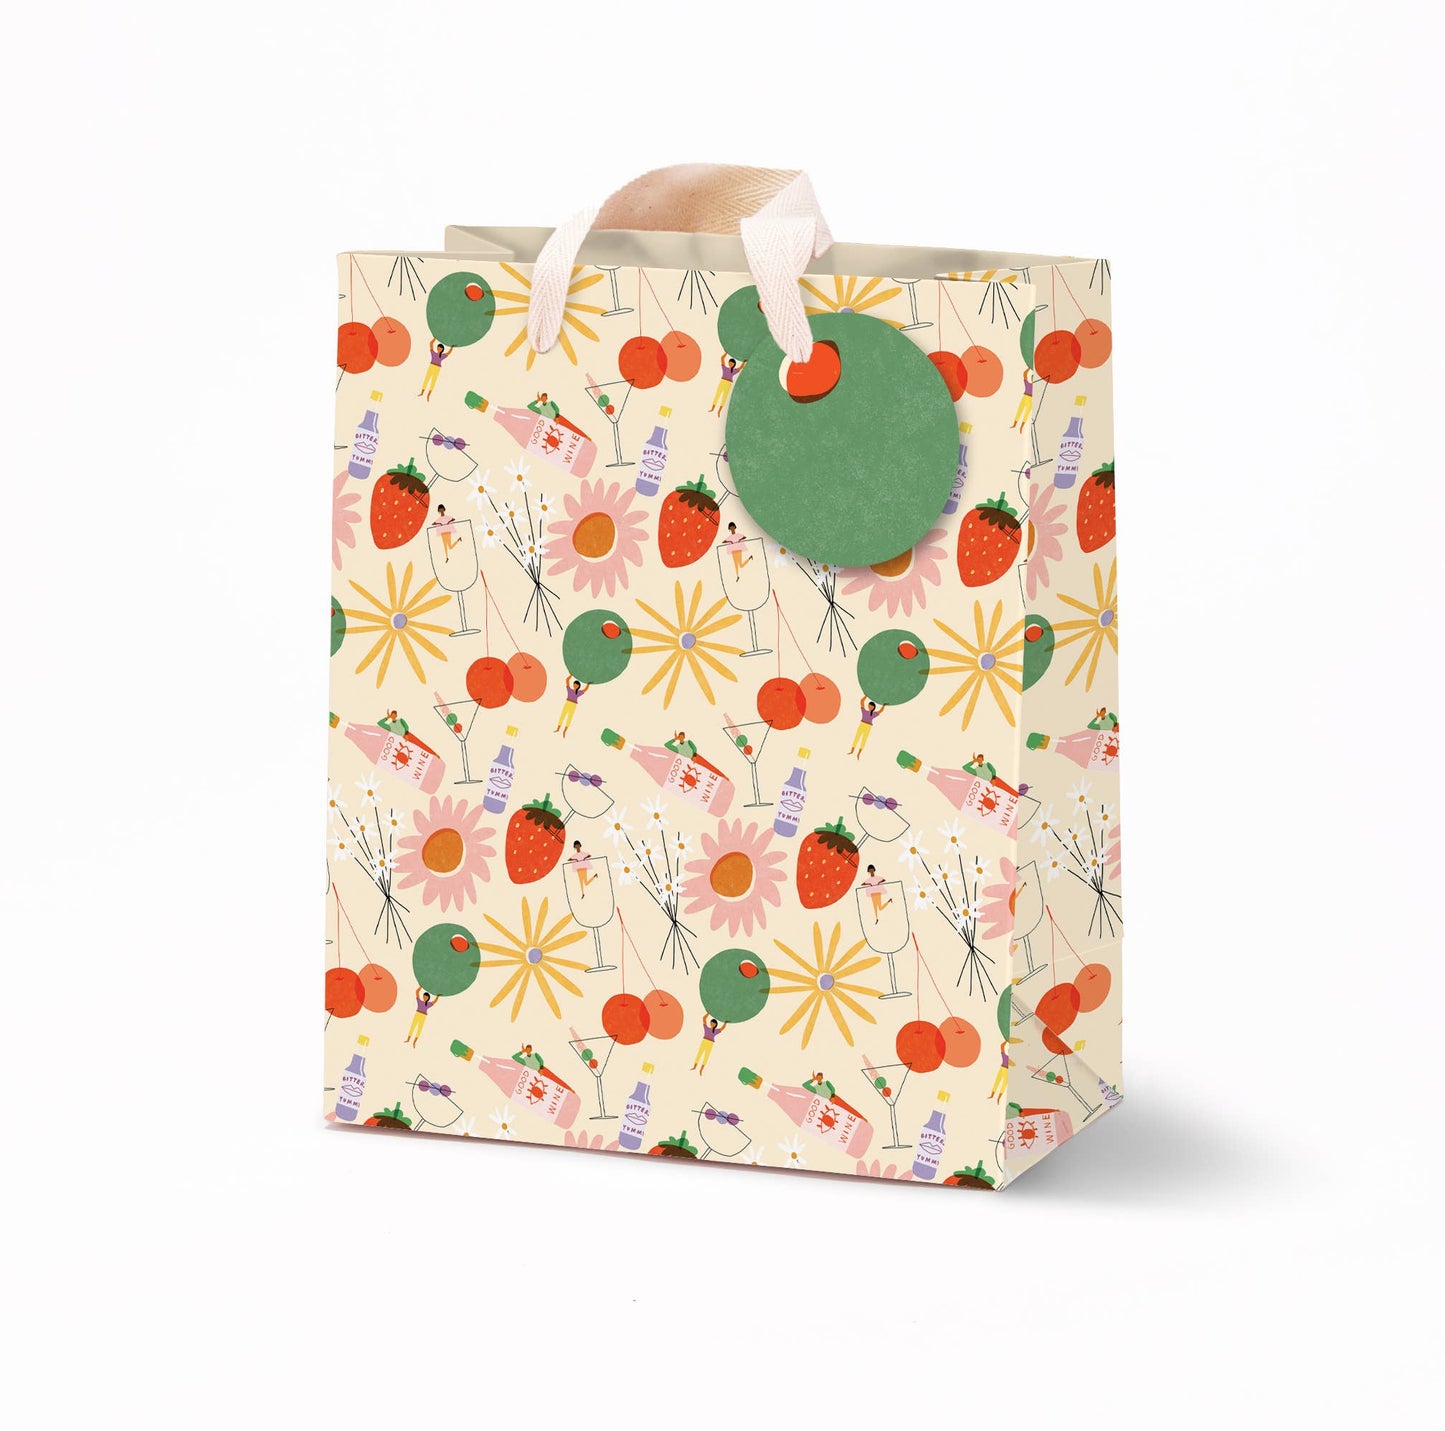 Gift bag designed with tiny people reveling, vibrant colors, strawberries, cherries, olives, flowers, wine bottles and various cocktail glasses, all on a white background. Gift tag attached to bag is a green olive. 